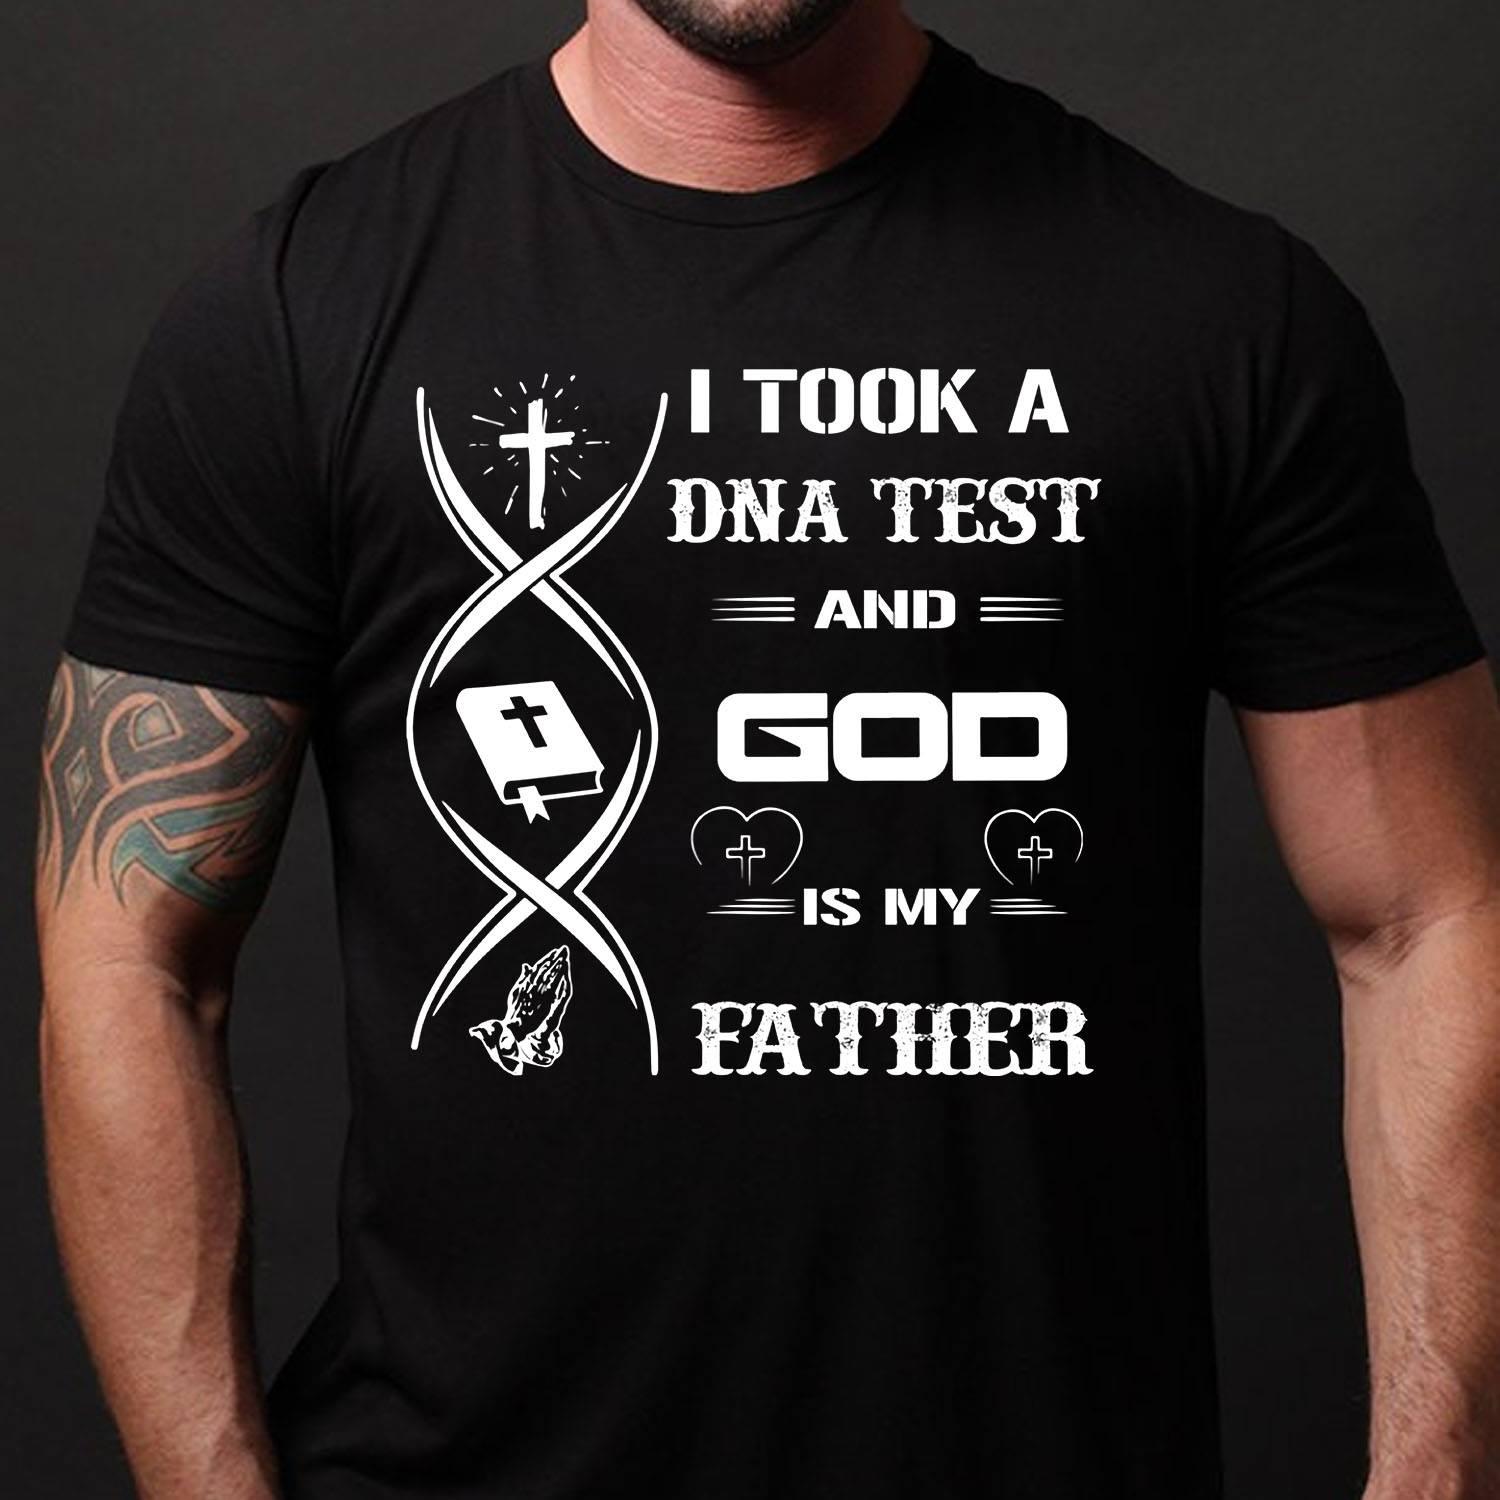 DNA Of God - I took a DNA test and god is my father